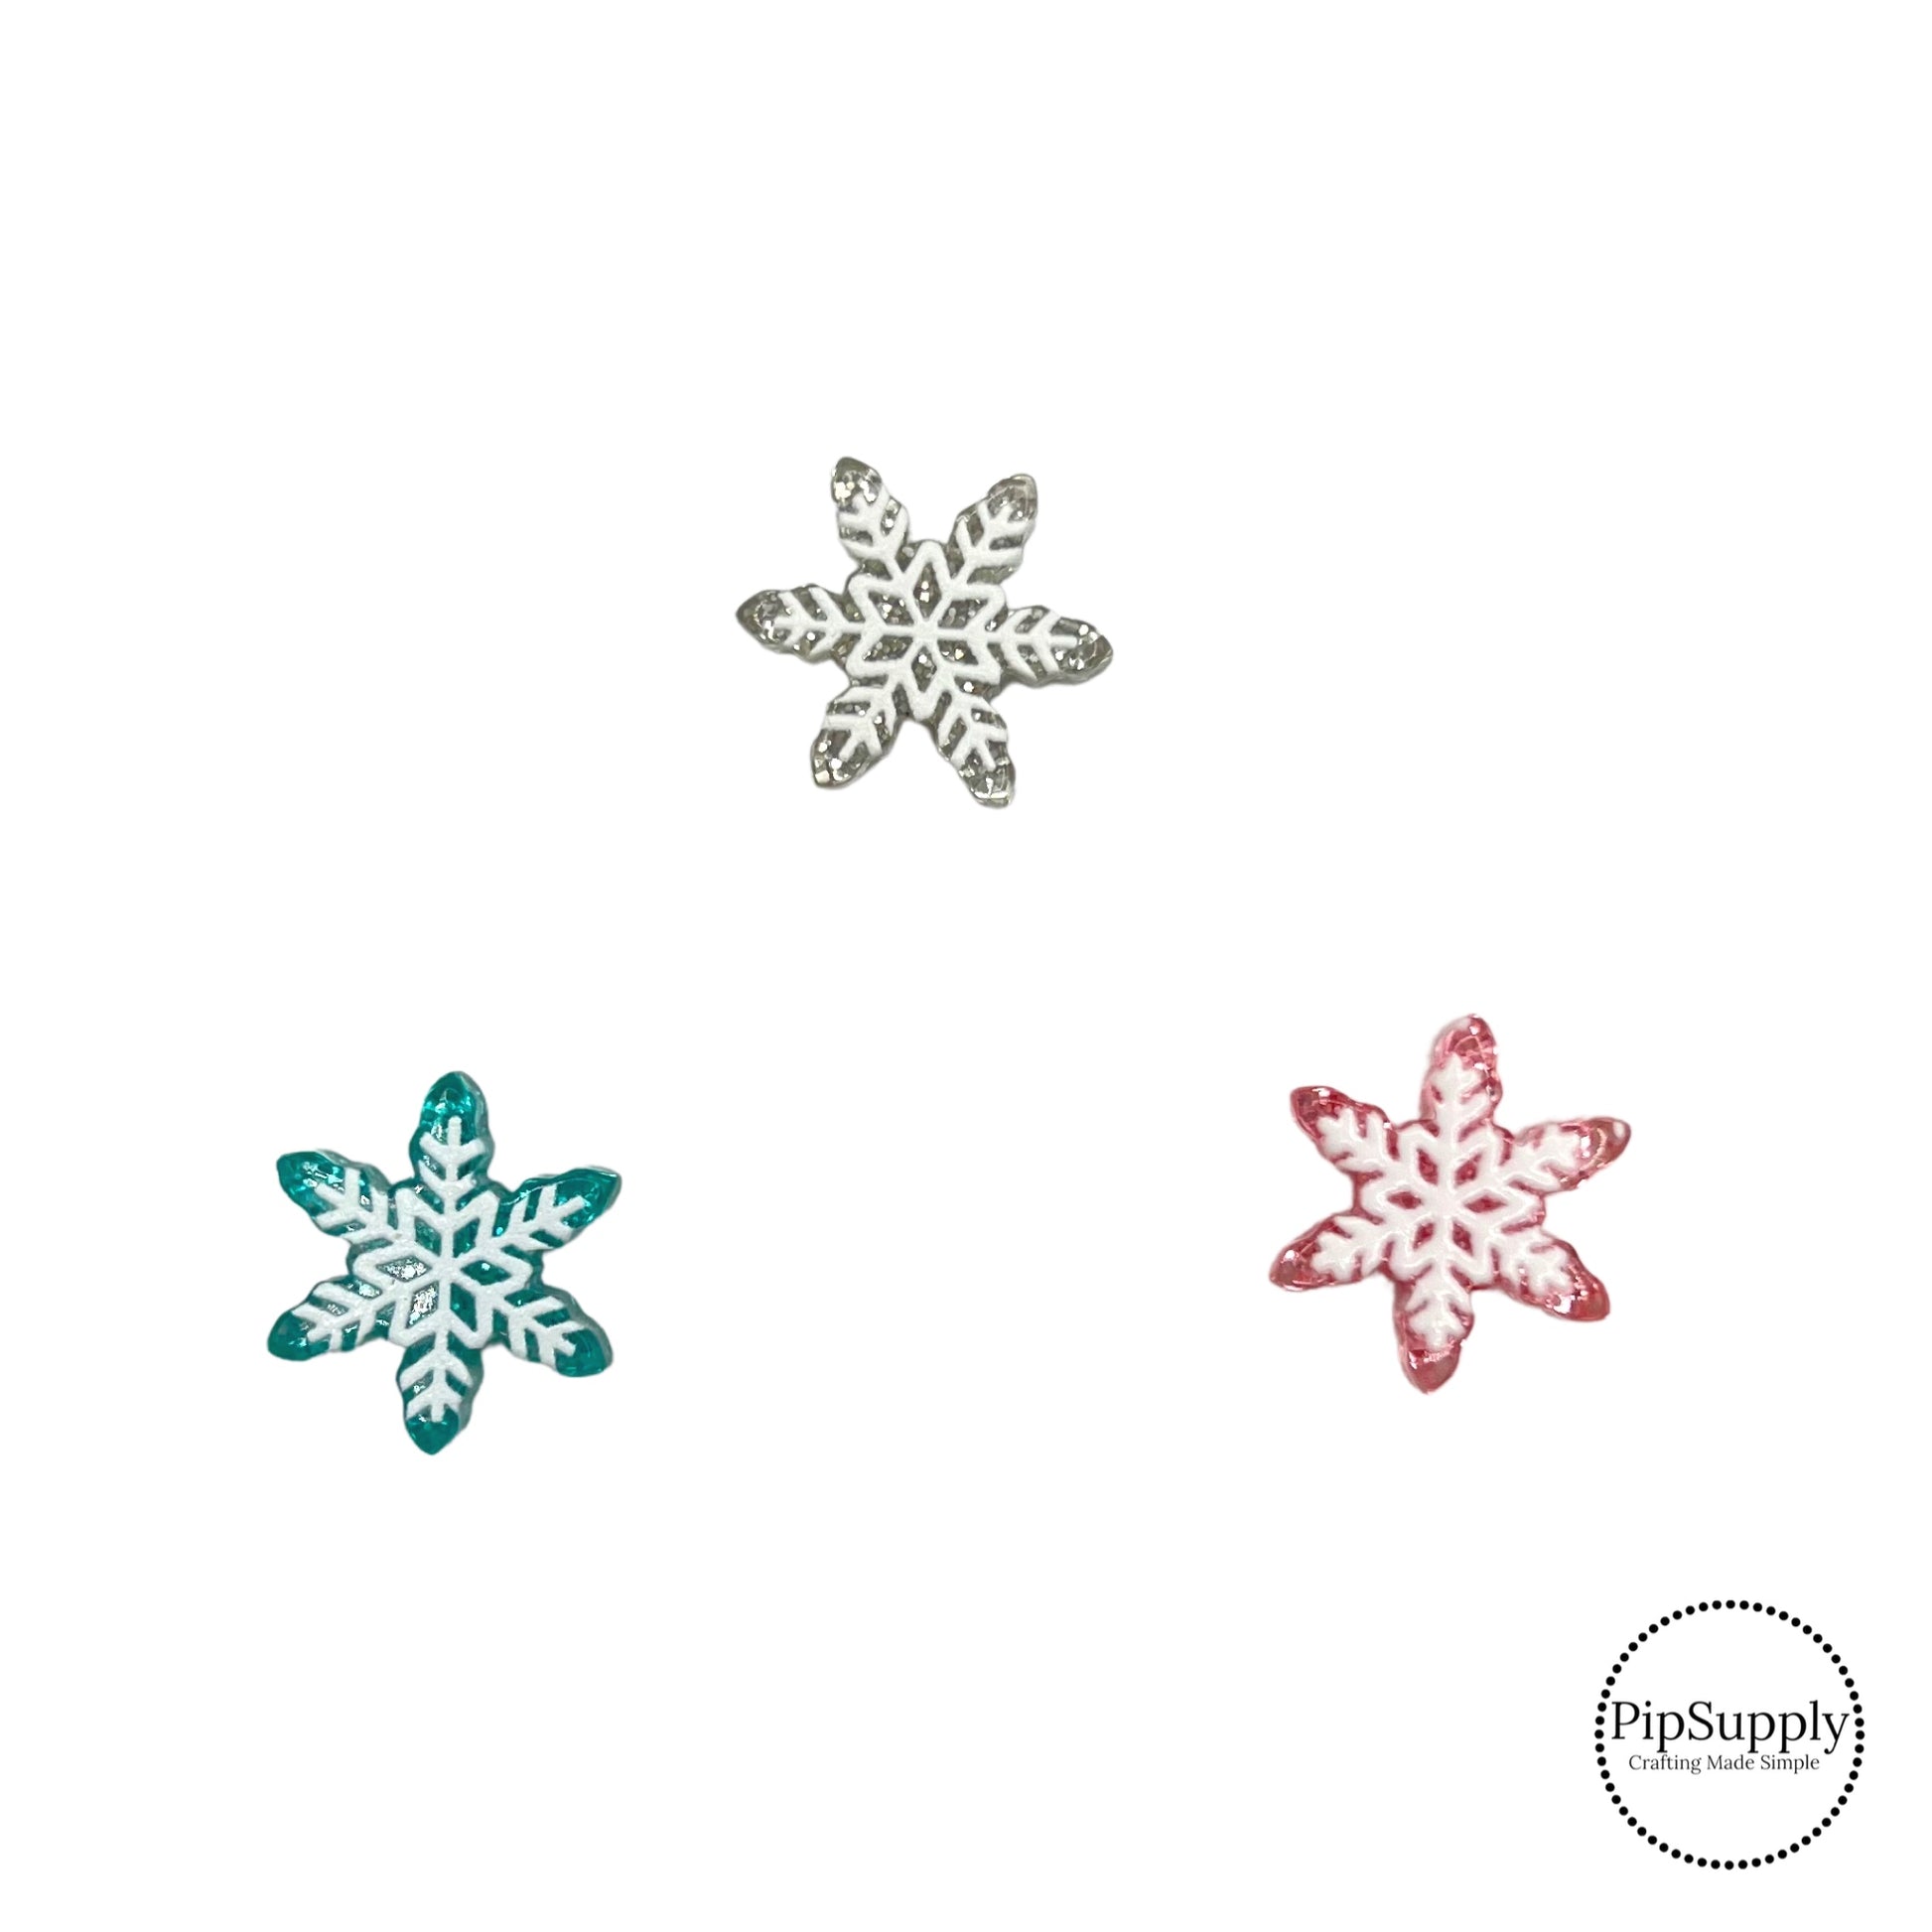 3 different multi color snowflake glitter charms in the colors pink, blue, and silver